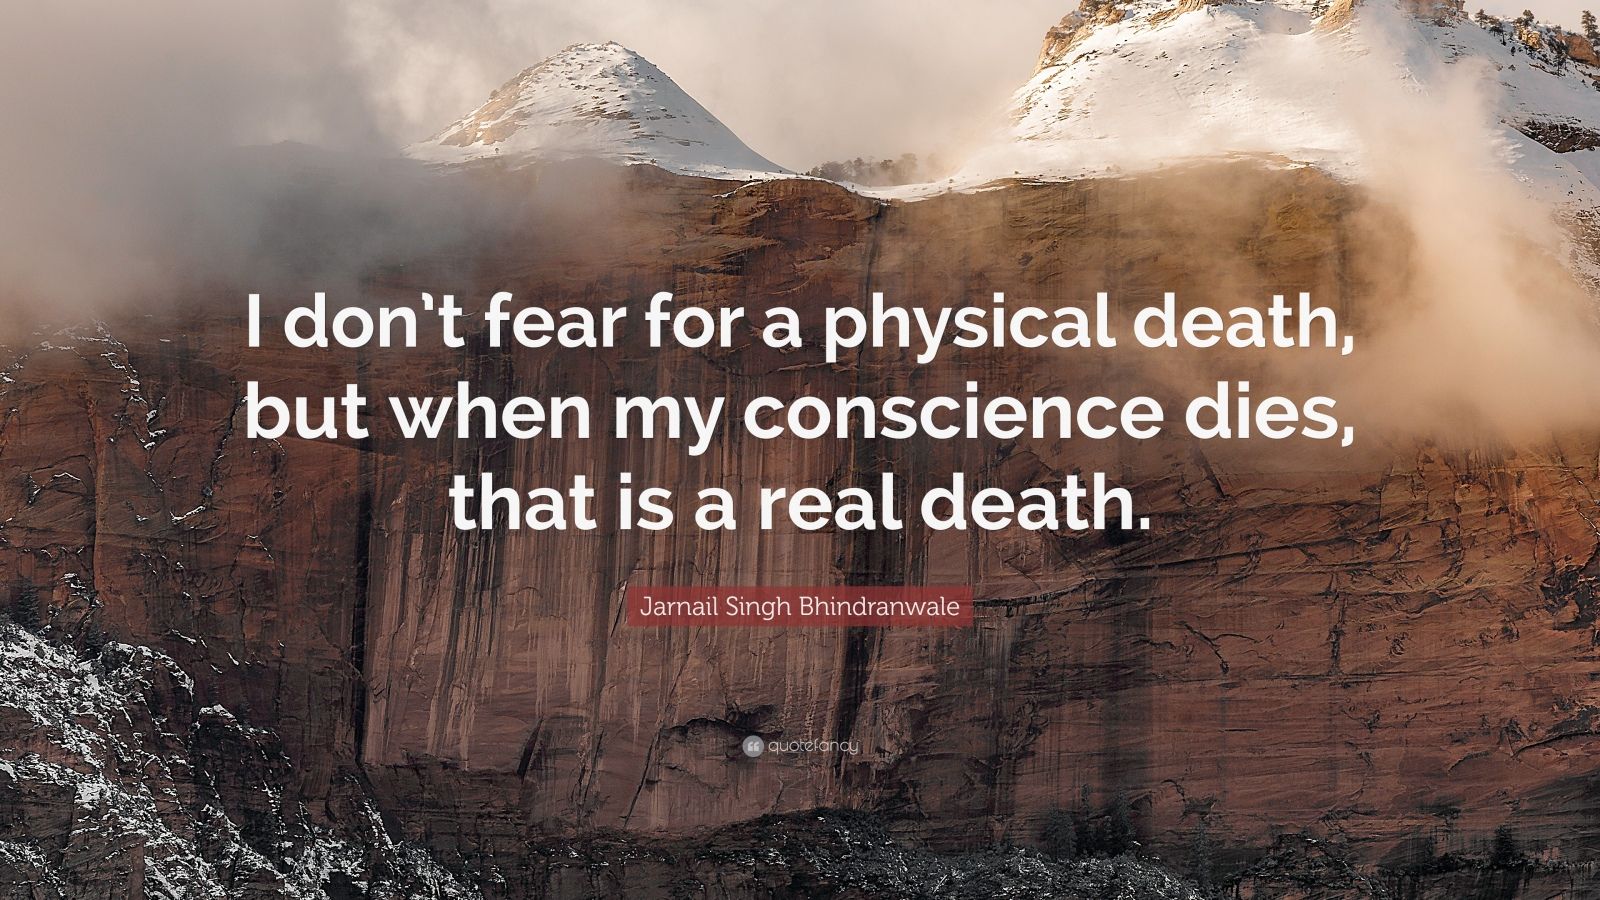 Jarnail Singh Bhindranwale Quote: “I don't fear for a physical ...